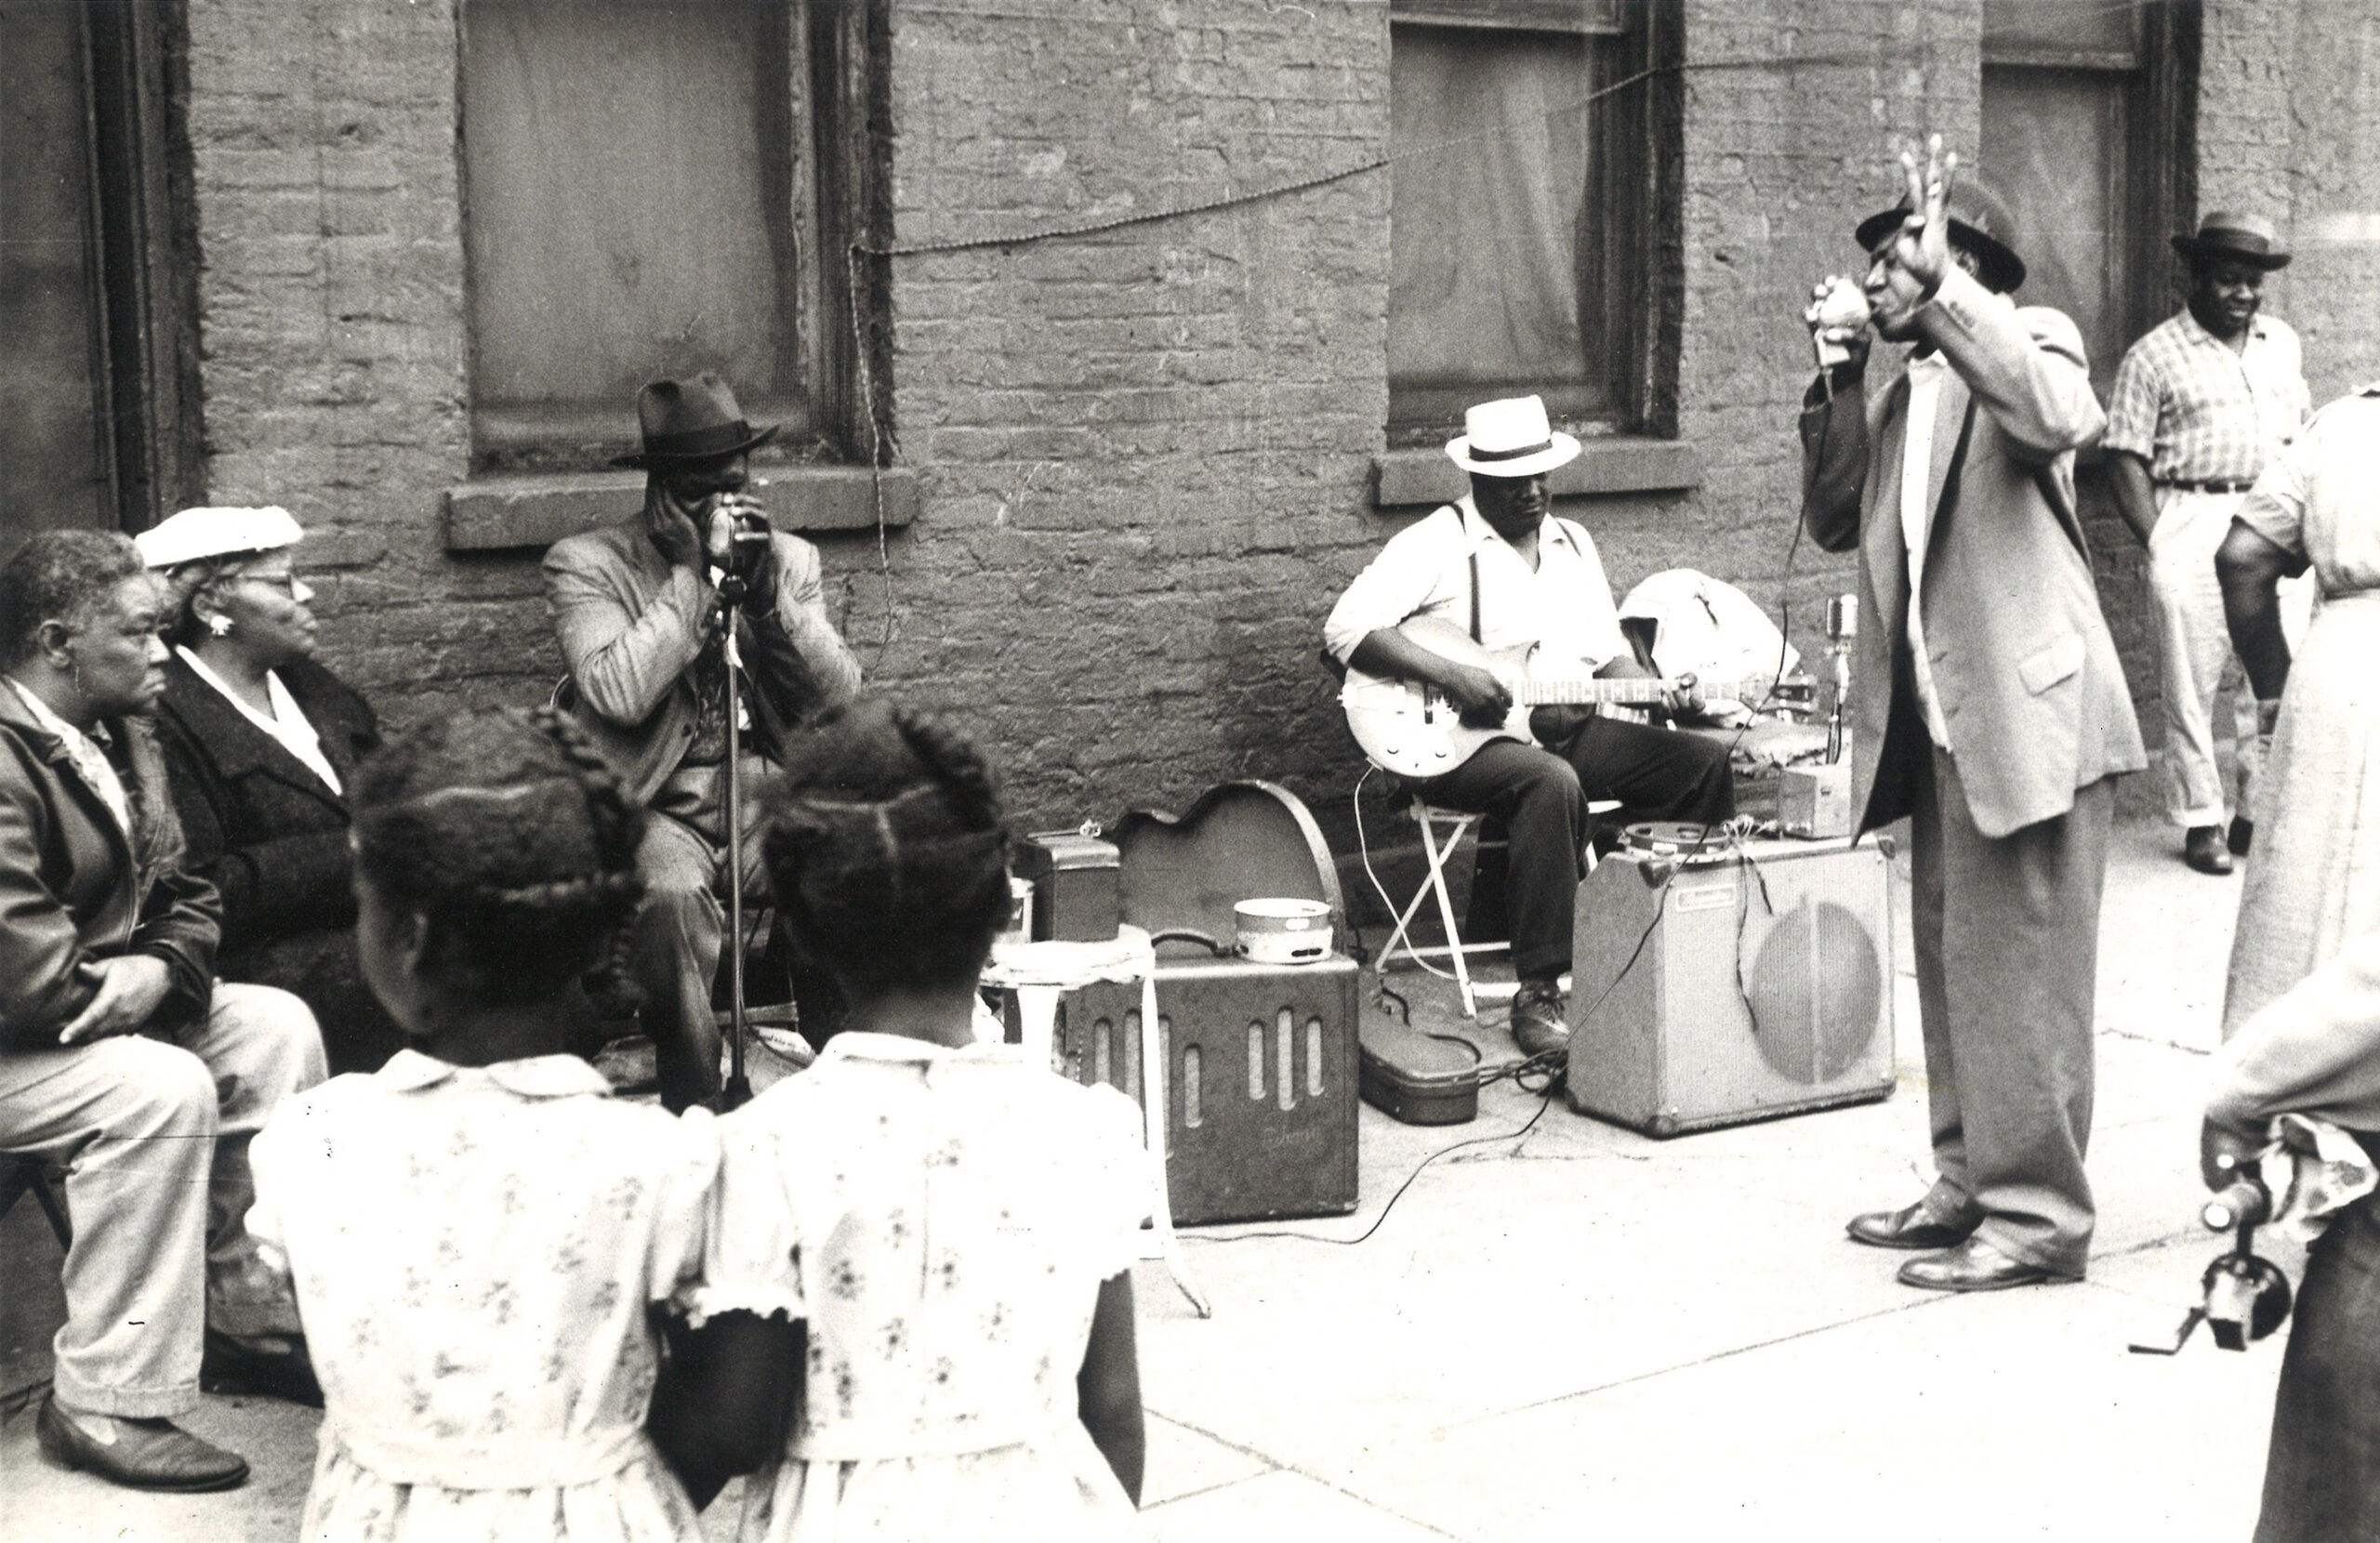 A black and white photo of Blues musicians playing in the street